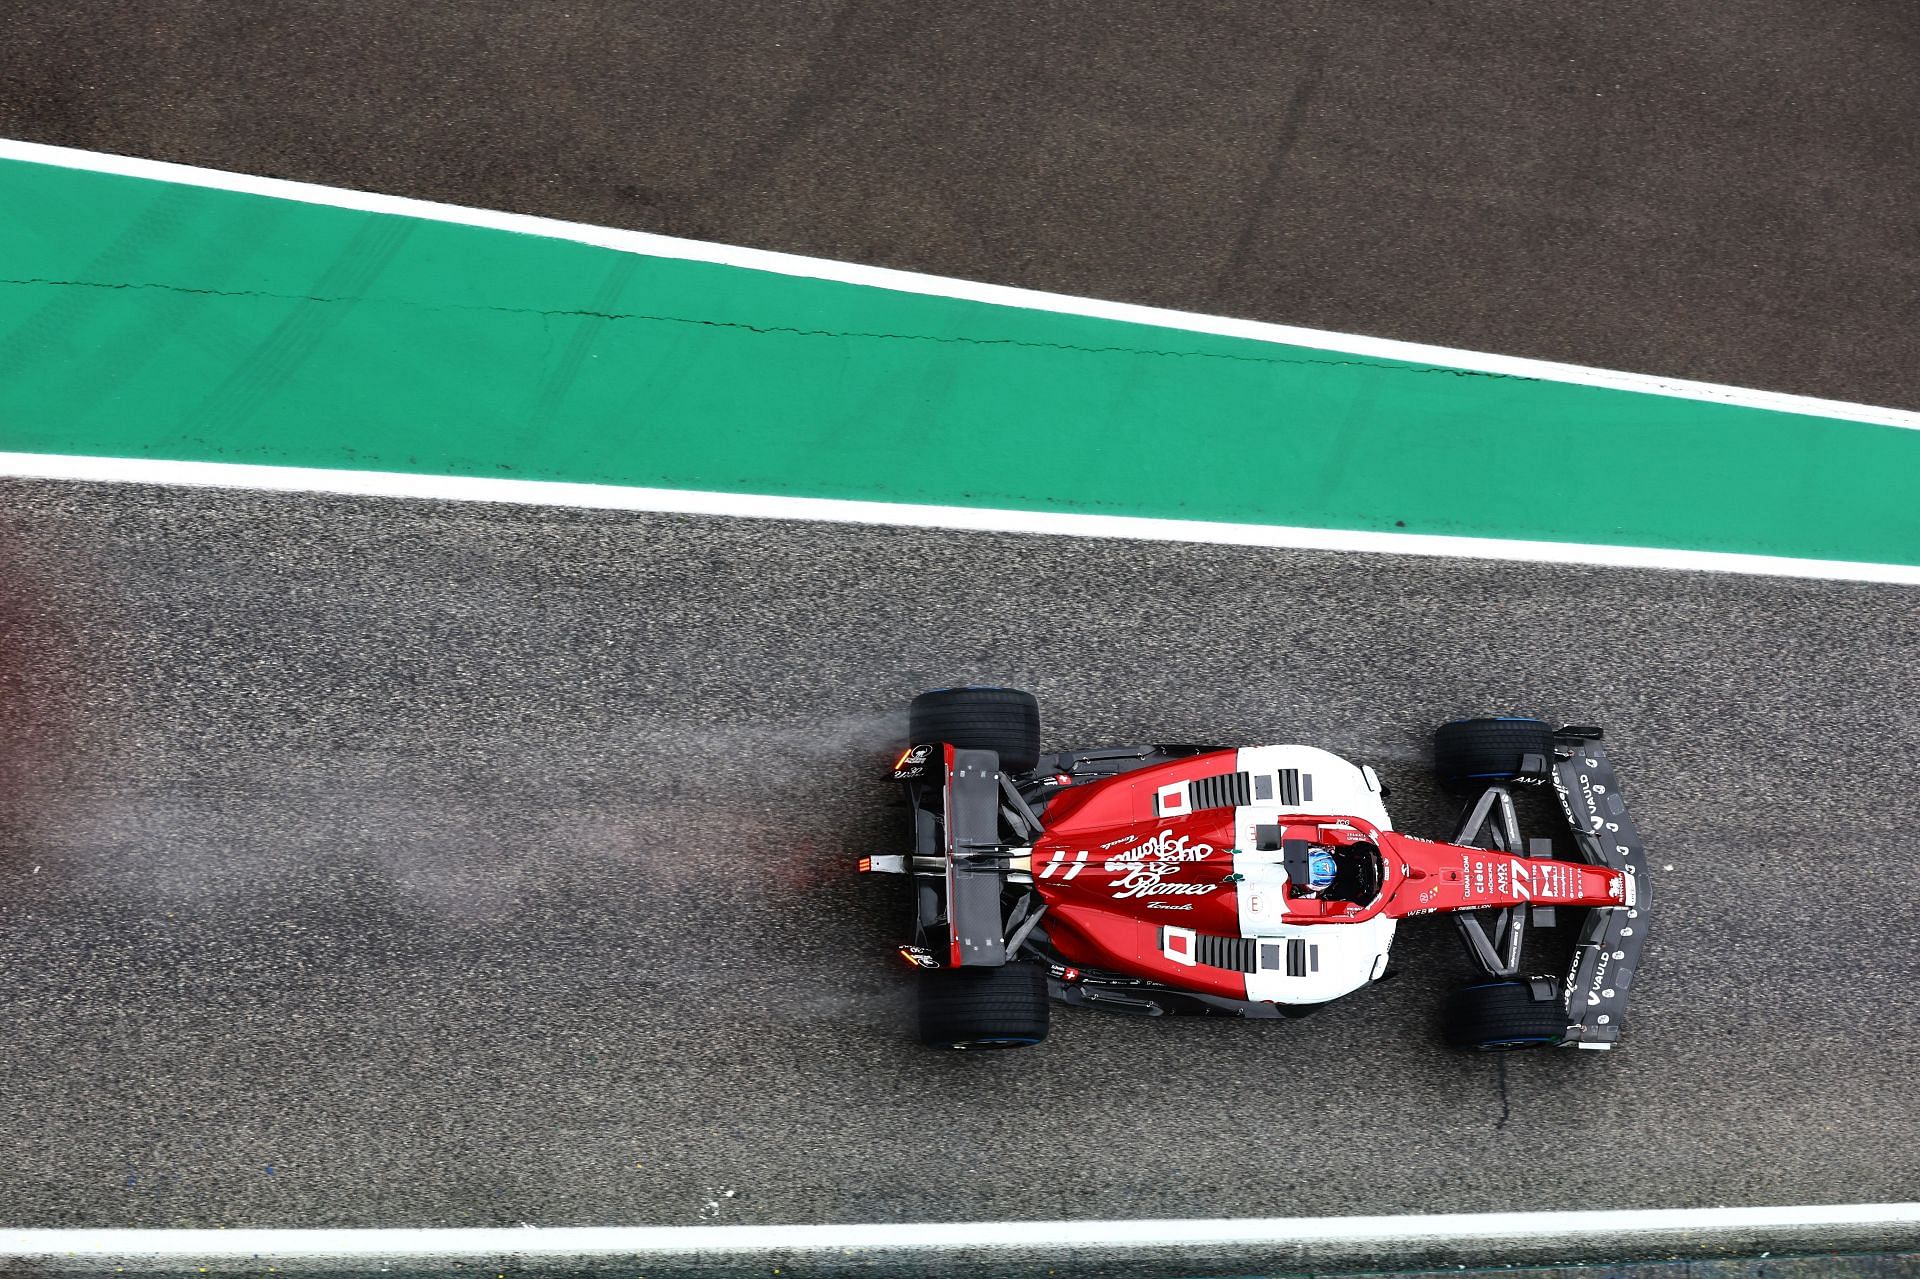 Valtteri Bottas driving the Alfa Romeo C42 during the 2022 F1 Imola GP weekend. (Photo by Mark Thompson/Getty Images)